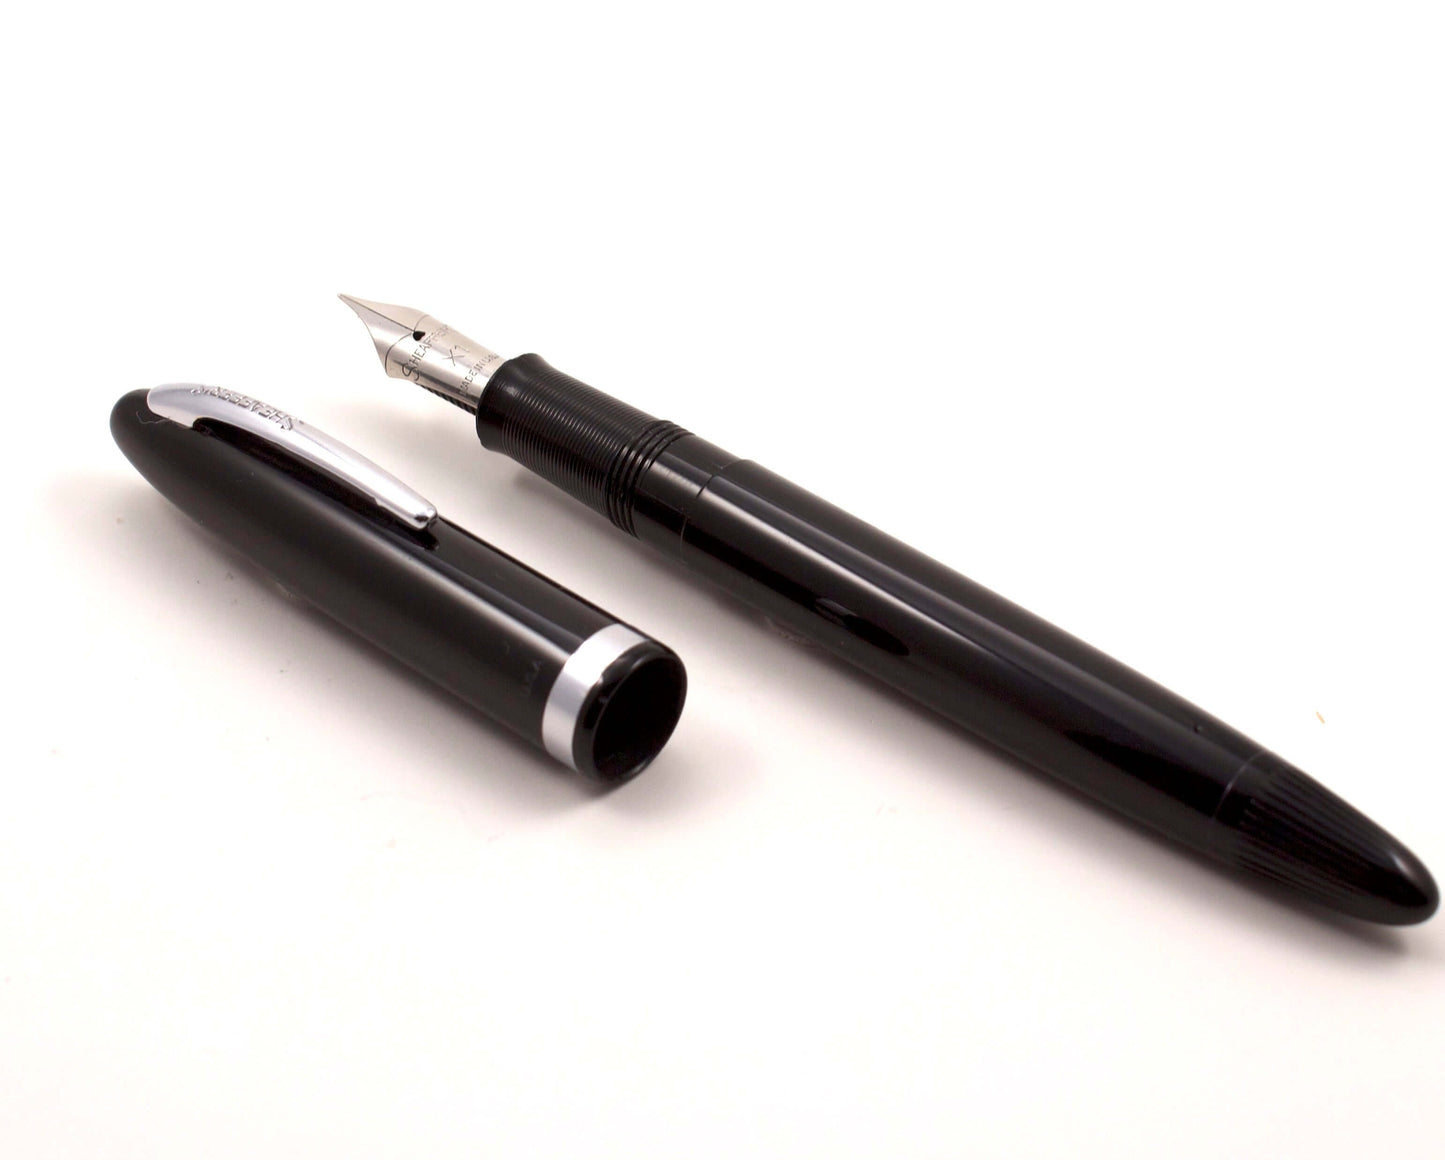 Sheaffer Tip-Dip Touchdown, Black, 1950's Stainless Nib, X1 Extra Fine Type: Sheaffer Tip Dip Fountain Pen Manufacture Year: 1950's Length: 5 1/8 Filling System: Touchdown; Restored with new sac and O-ring Color/Pattern: Black Nib Type/Condition and remar